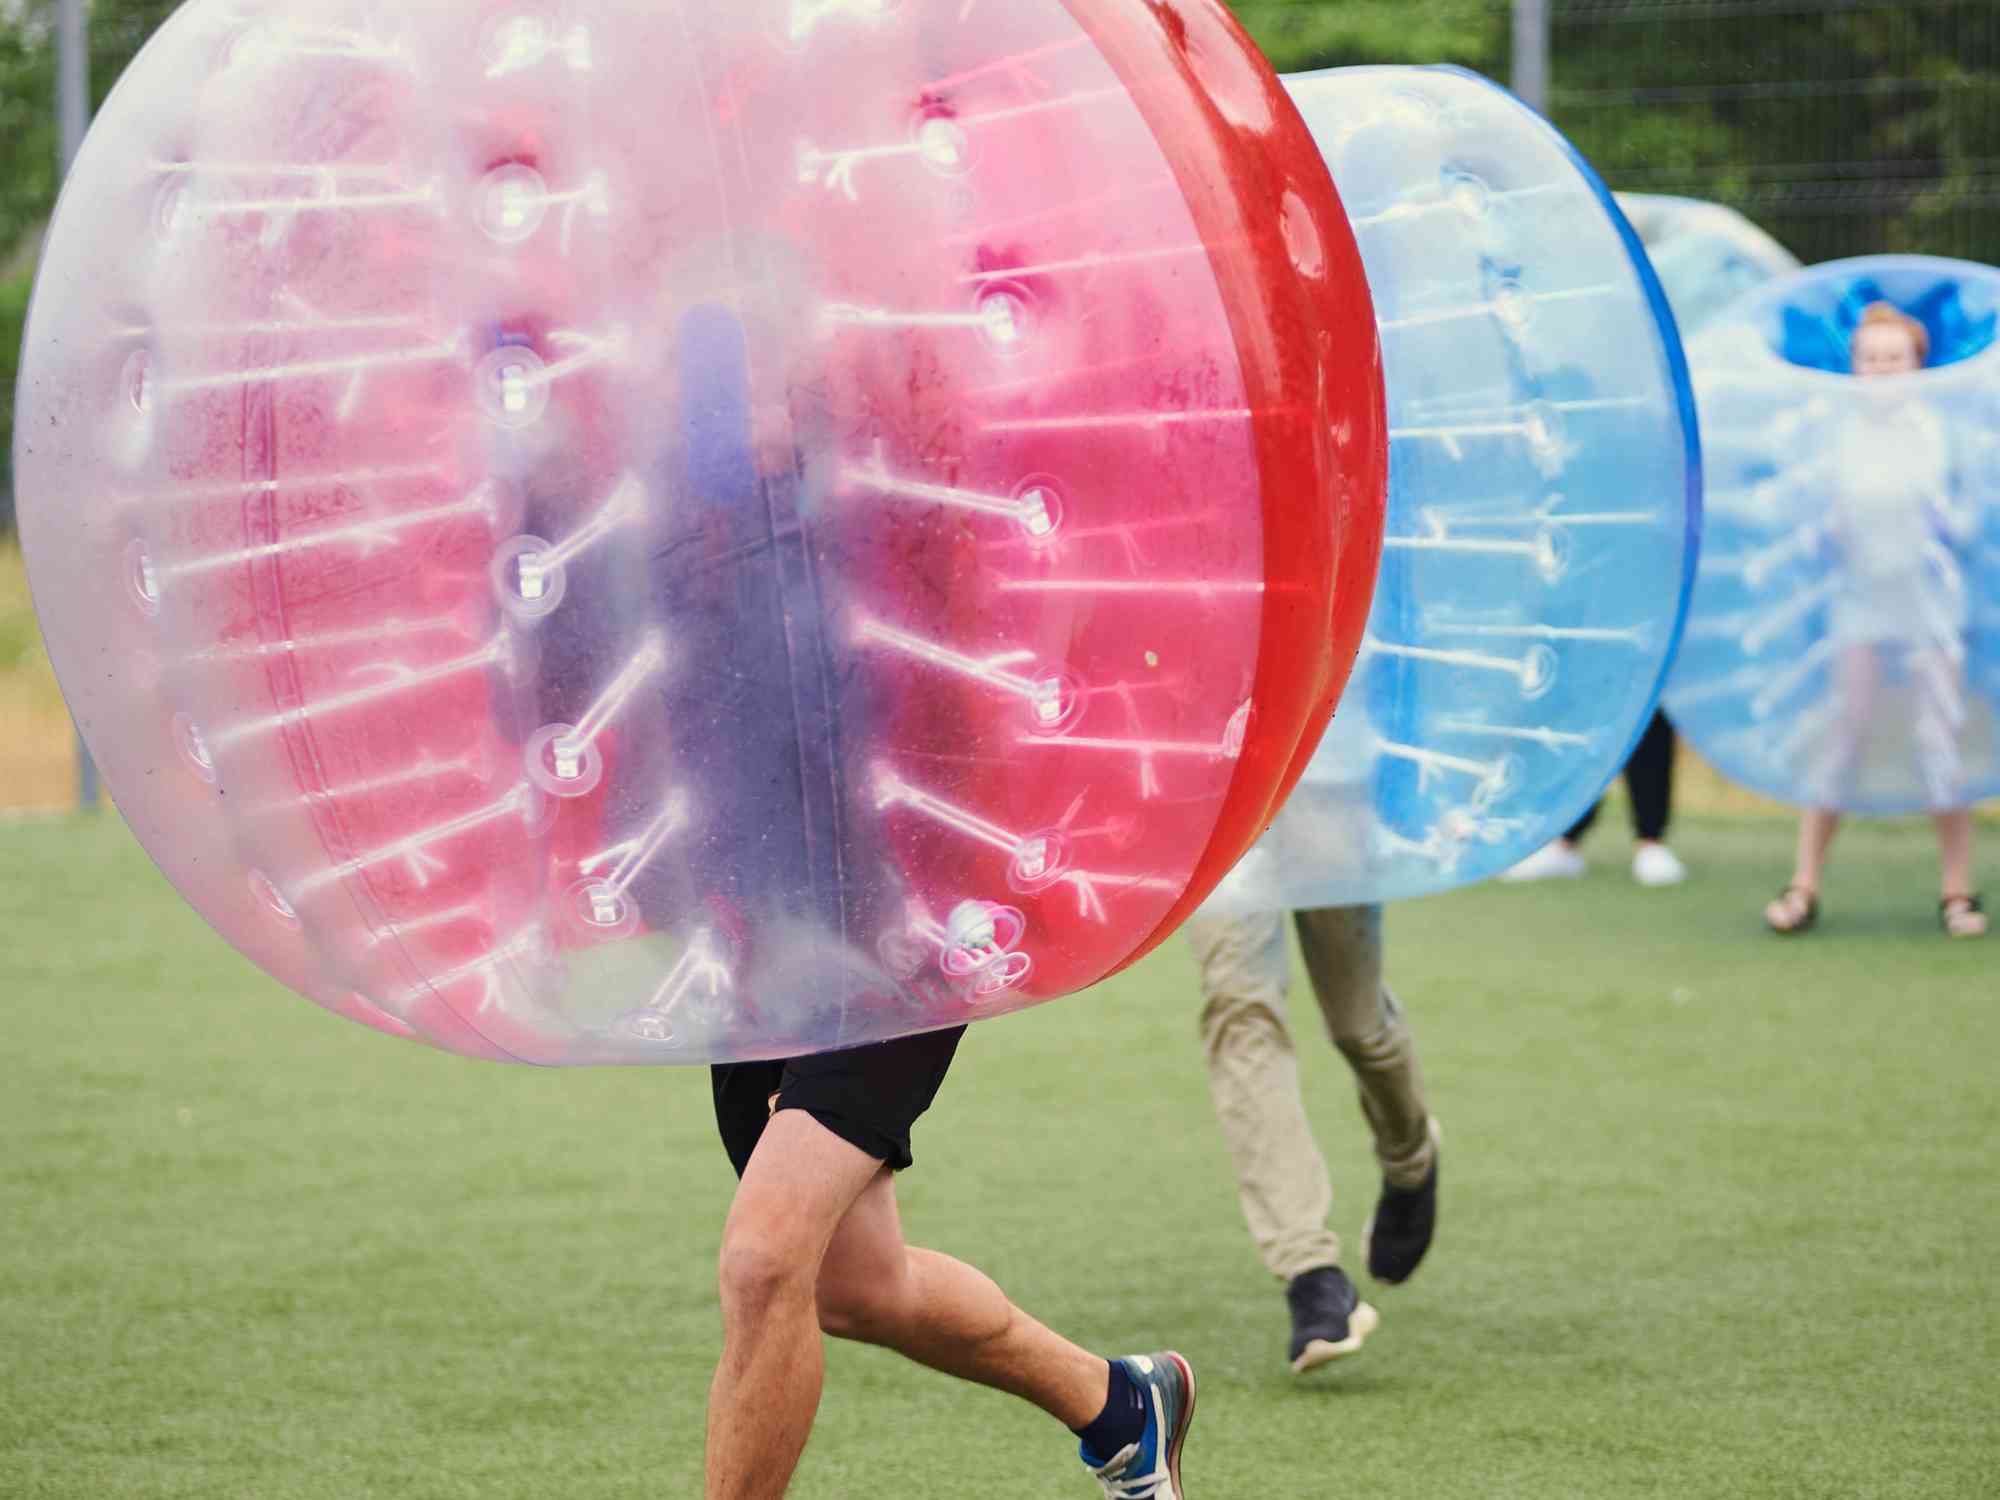 Cheap Stag Do Ideas in London - Bubble Football